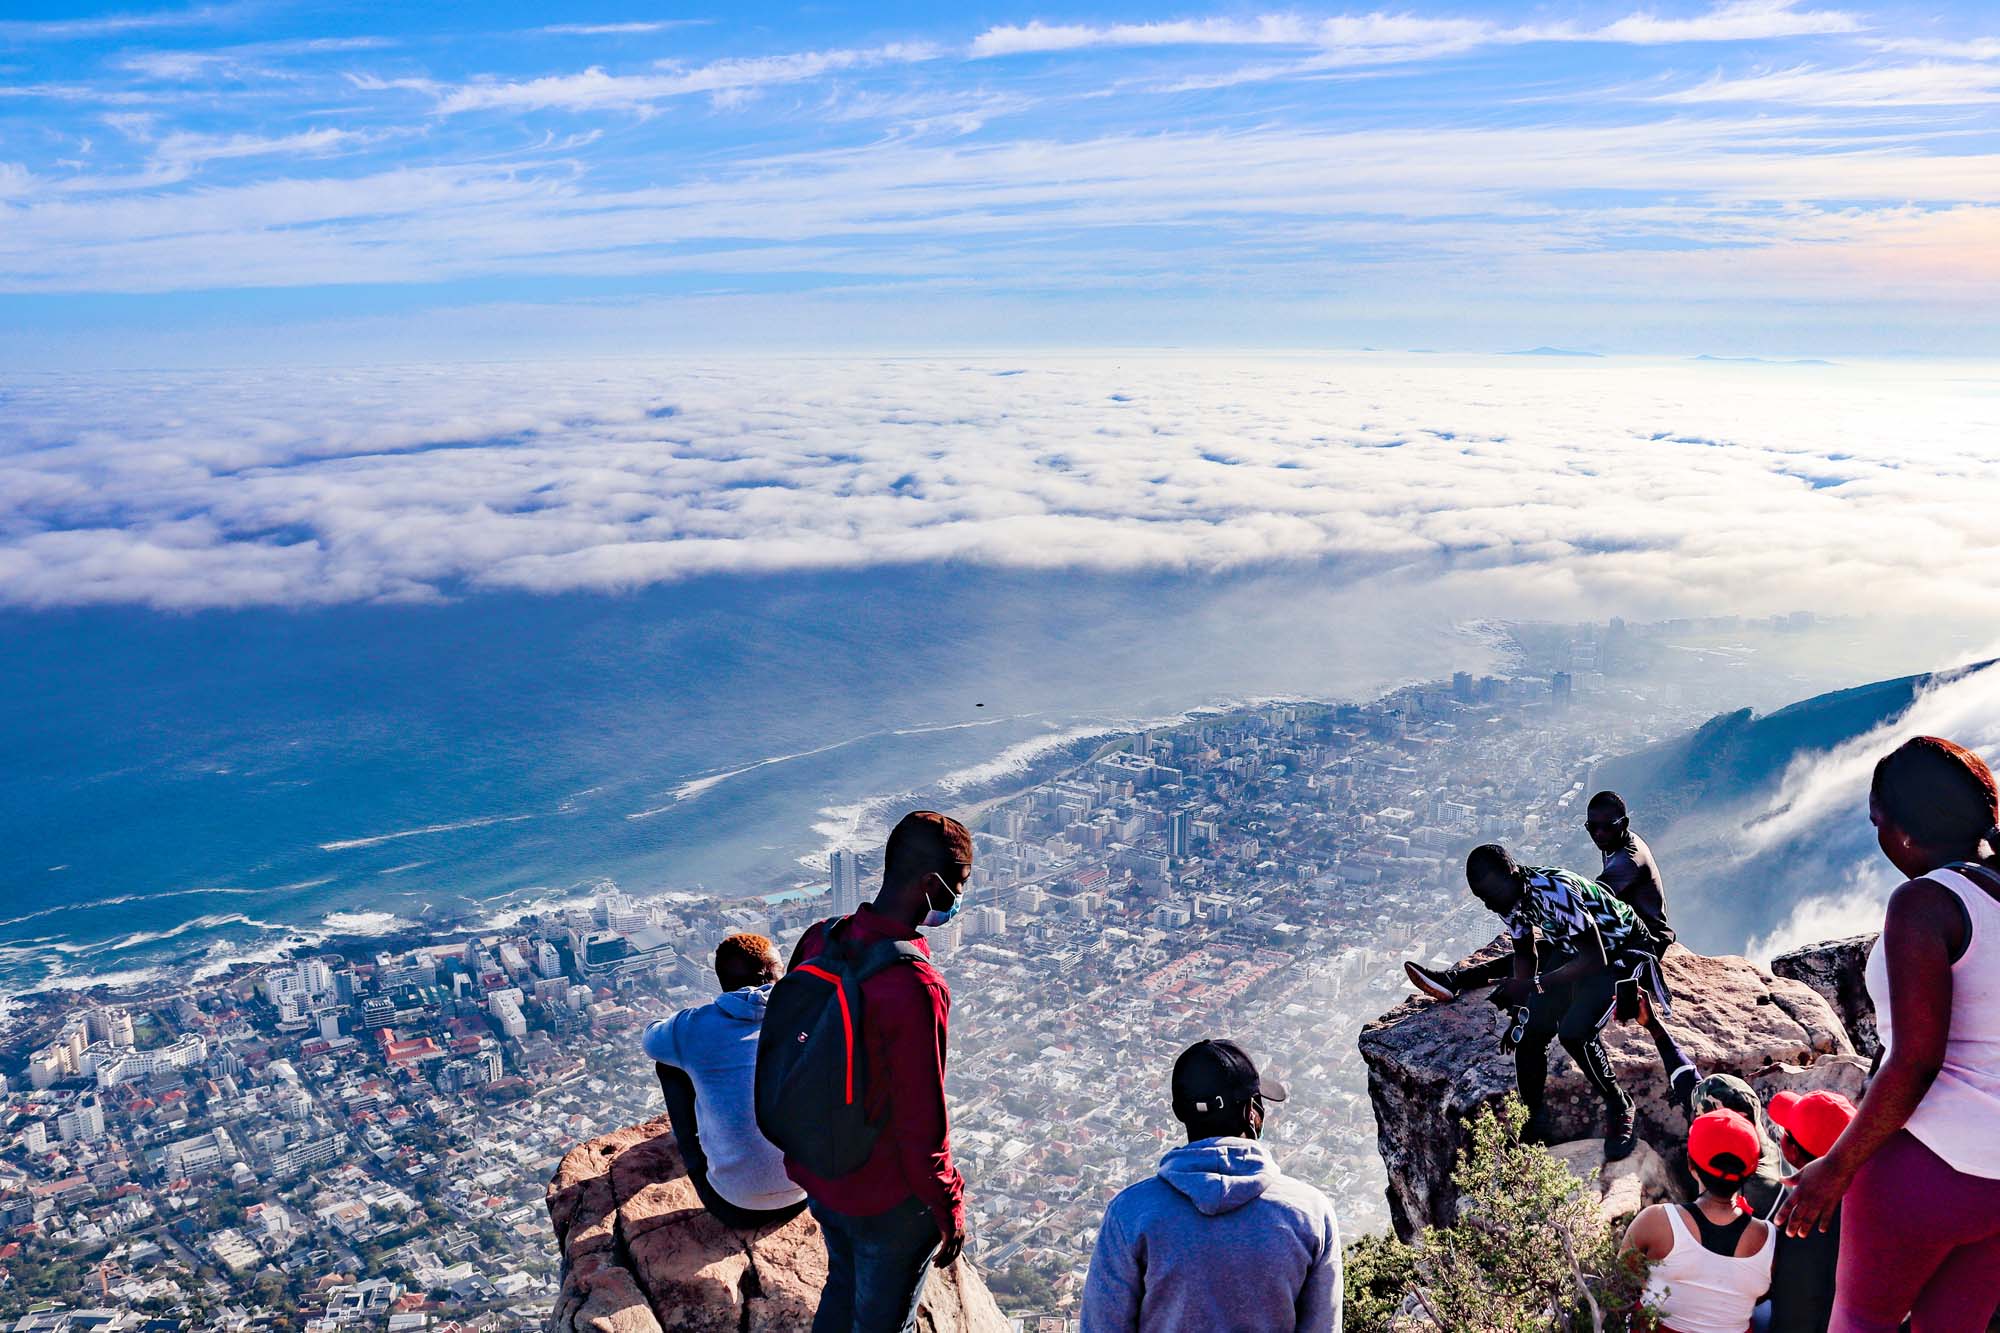 Vice-Chancellor Mamokgethi Phakeng and the Mastercard Foundation Scholarship Programme students took on the challenge of the difficult hike up Lion&rsquo;s Head on Saturday morning, 12 June 2021.